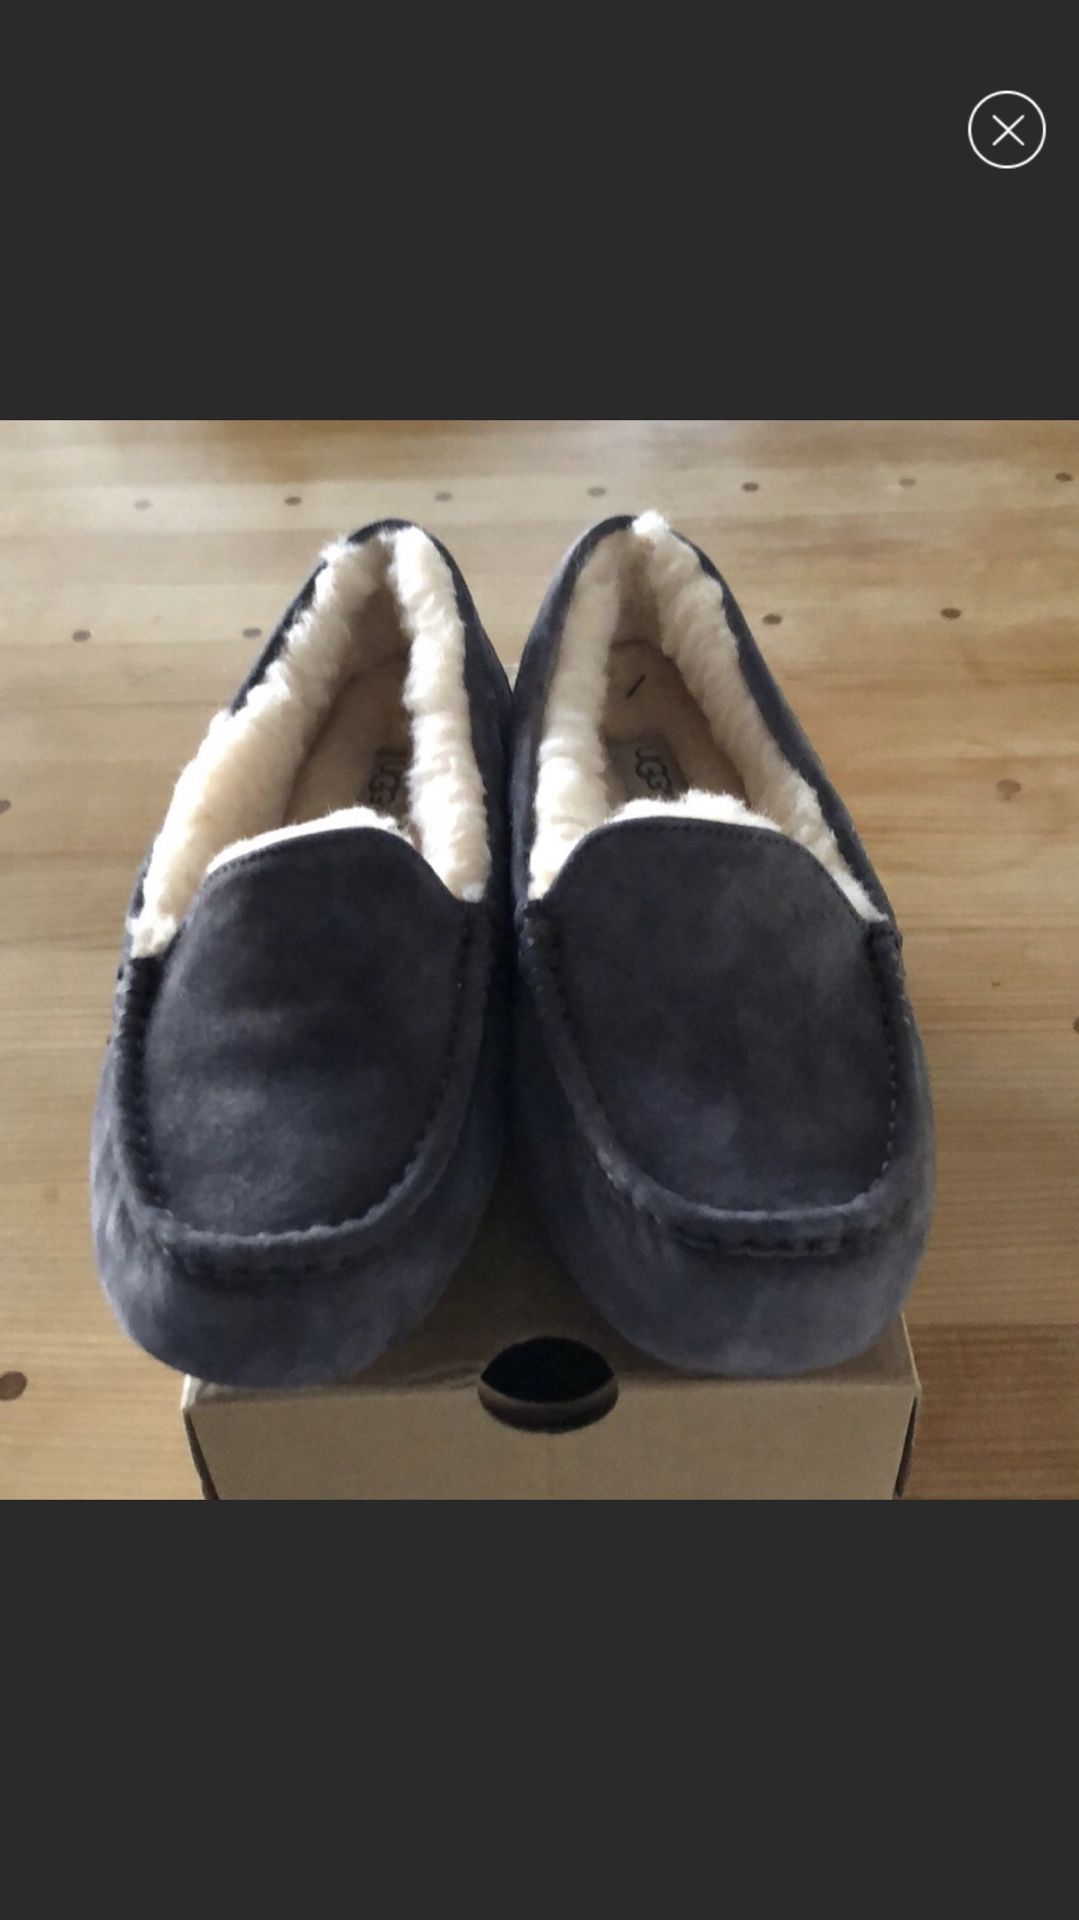 New! UGG loafers size 10 ladies